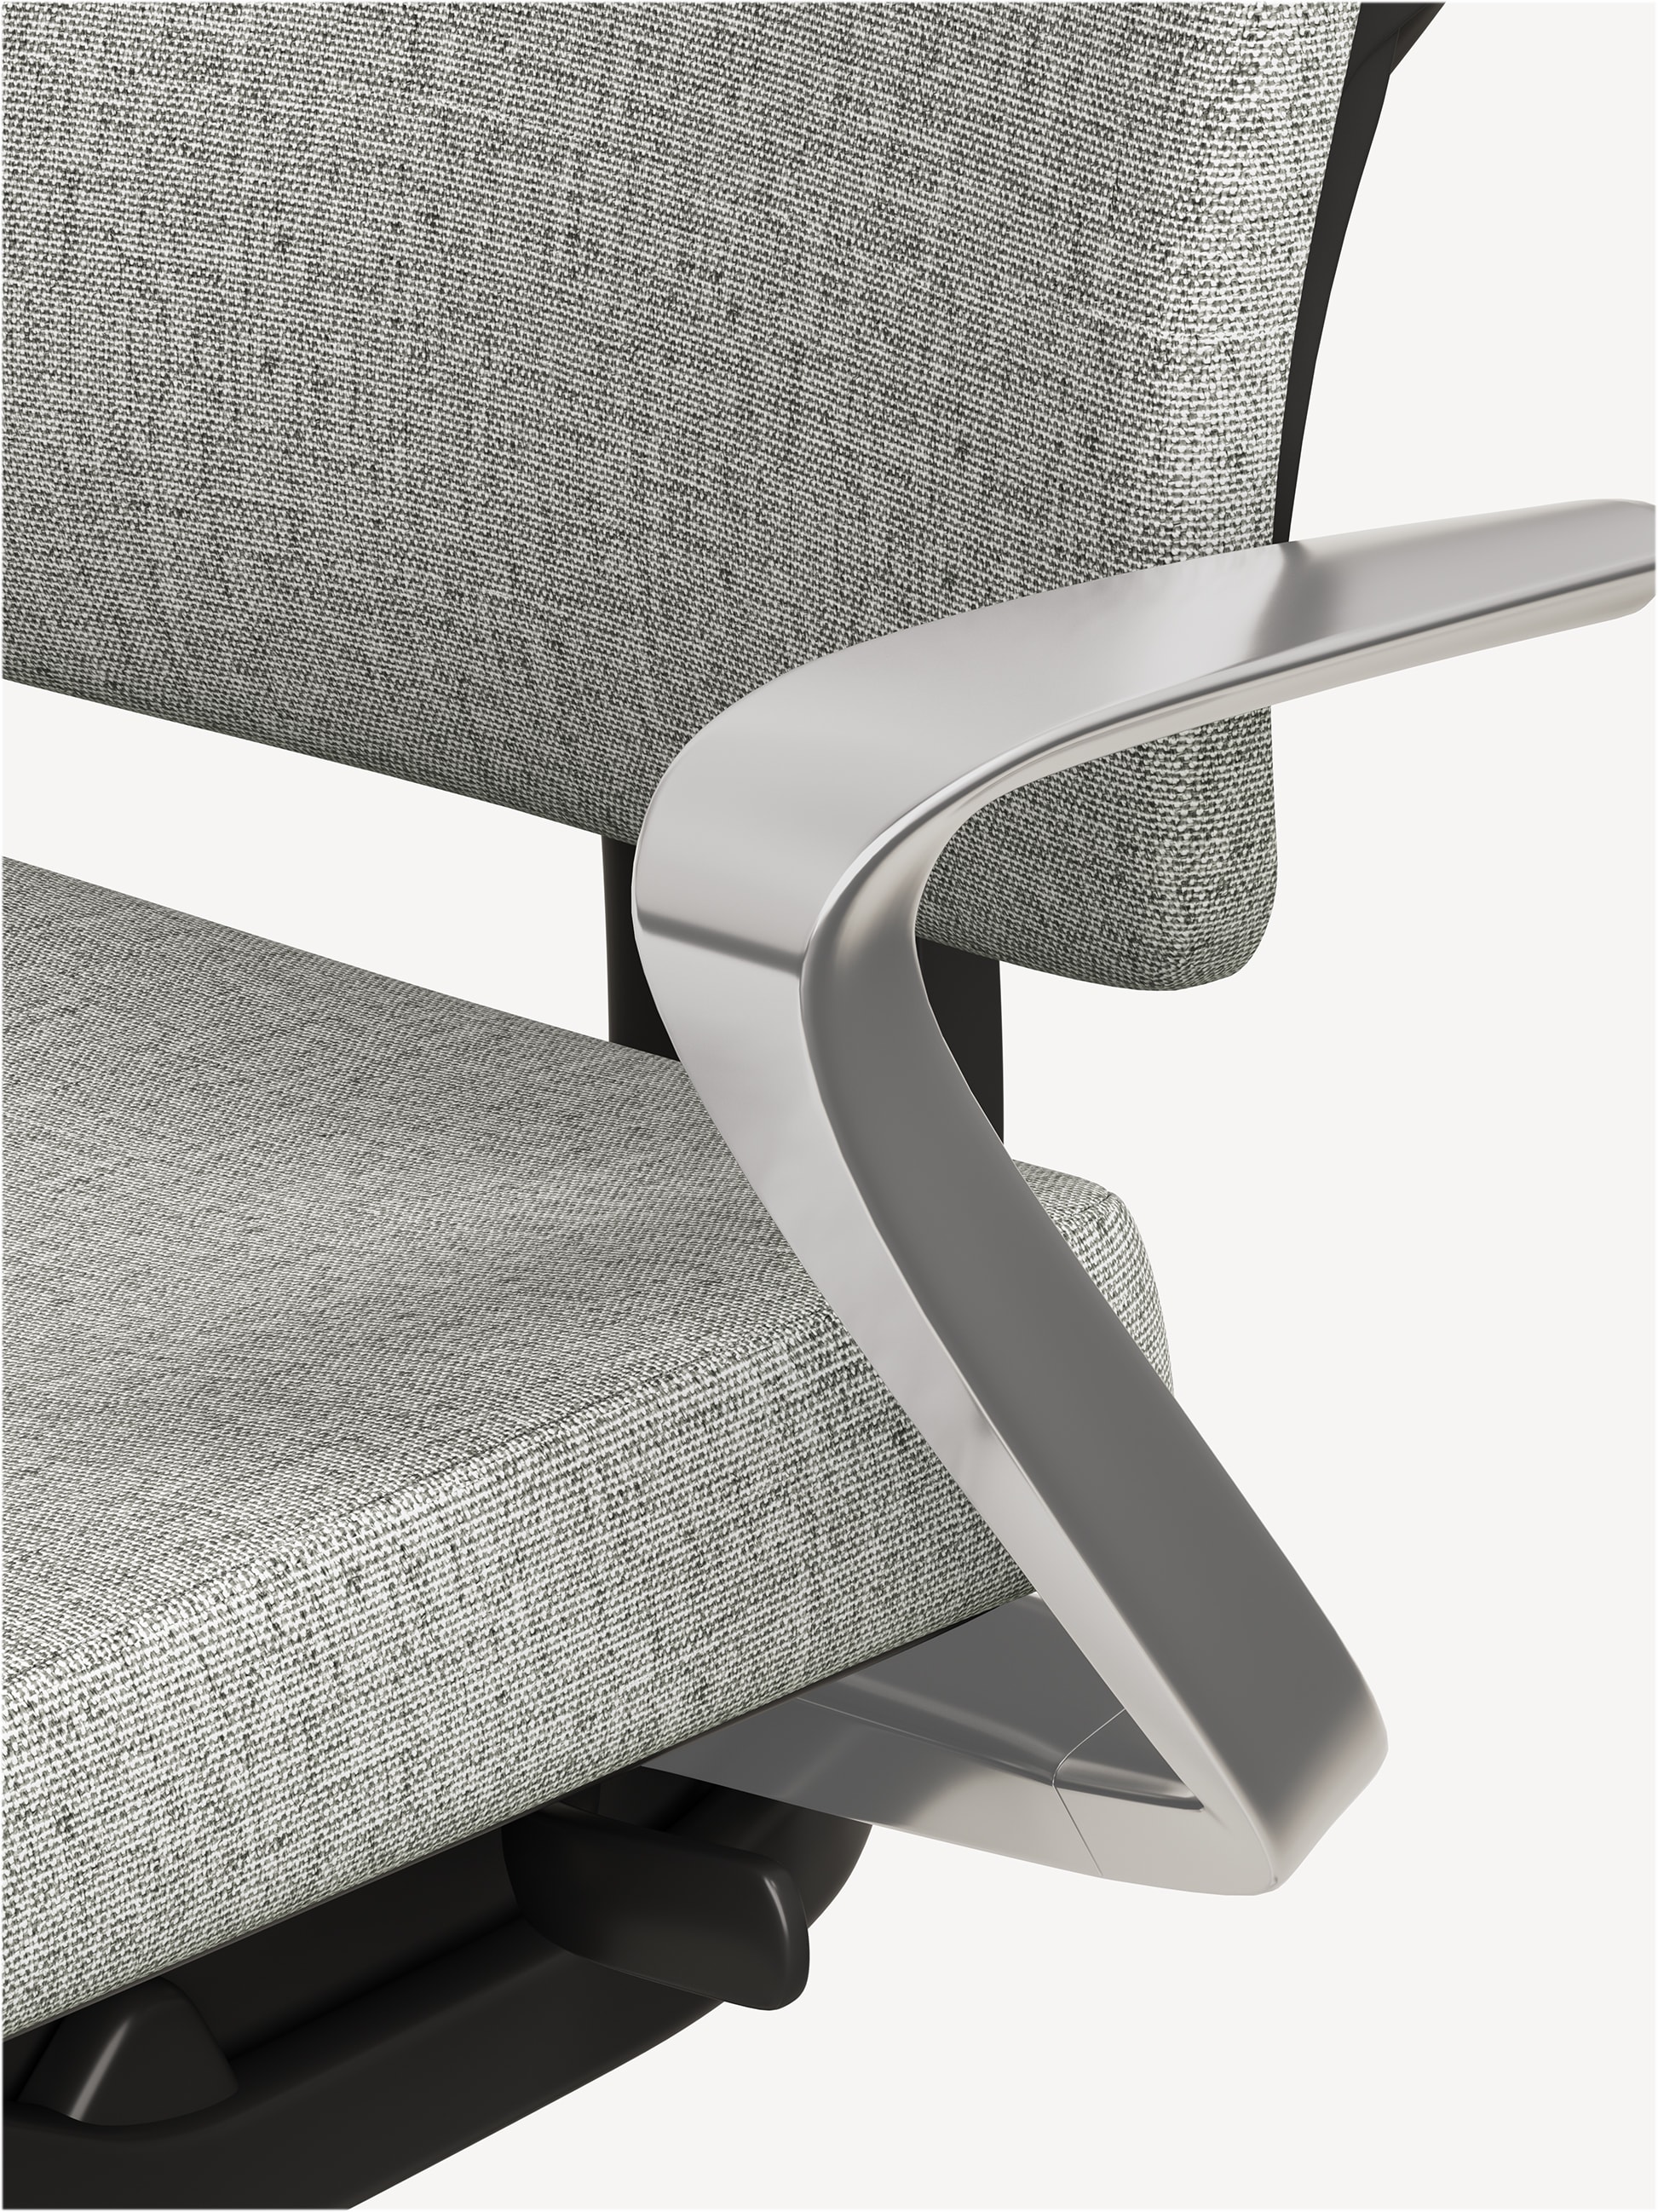 Detail view of the Allsteel Relate conference chair with silver arms and light grey upholstery.